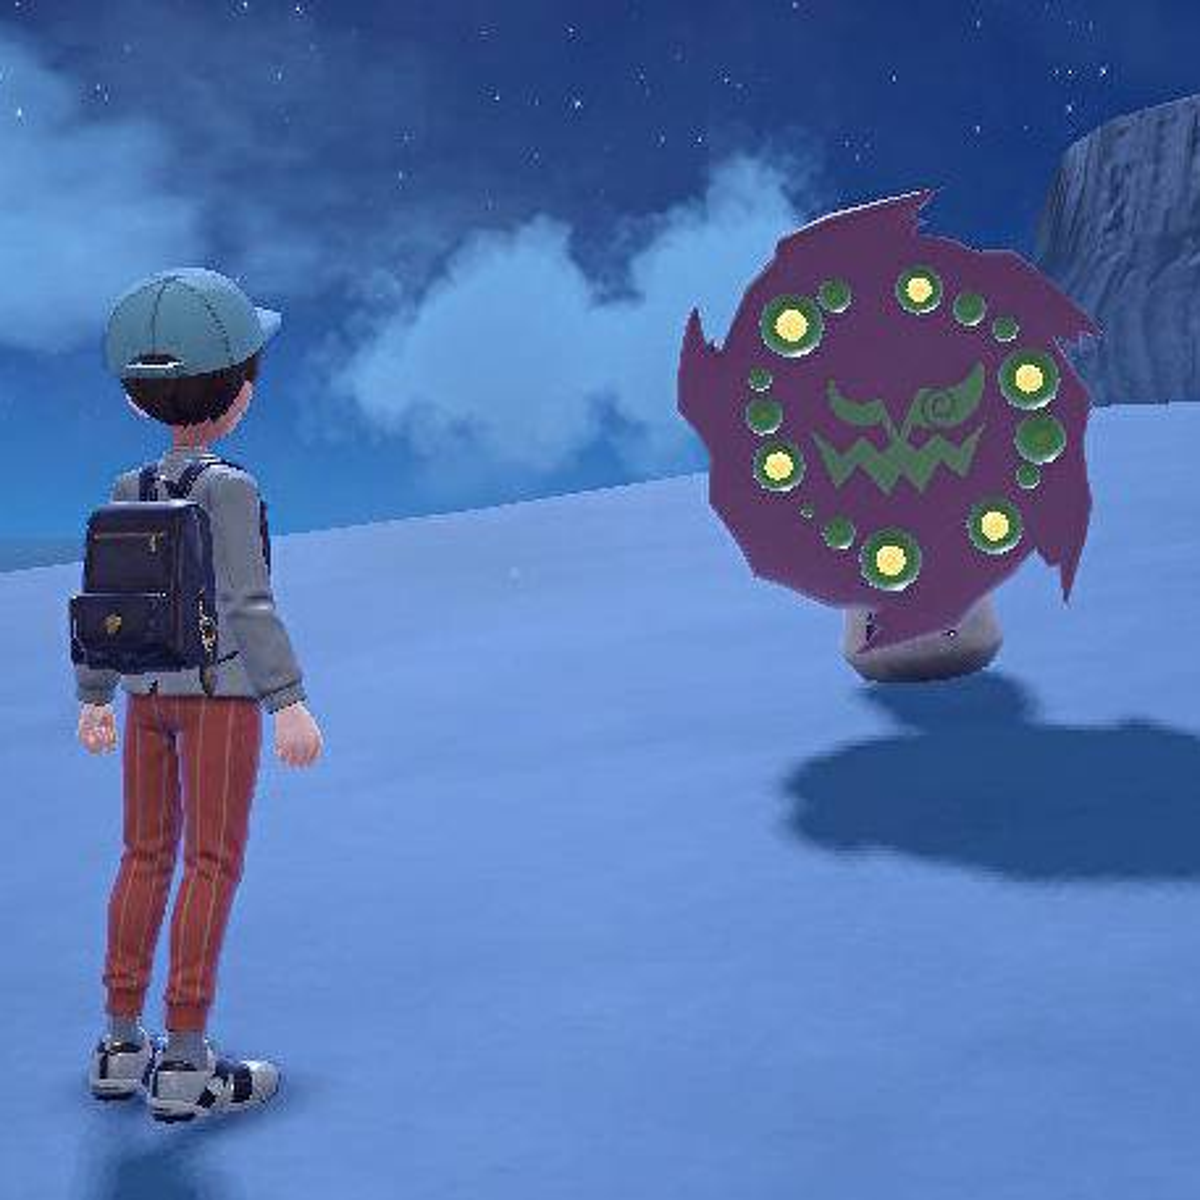 How to catch Spiritomb in Pokémon Scarlet and Violet